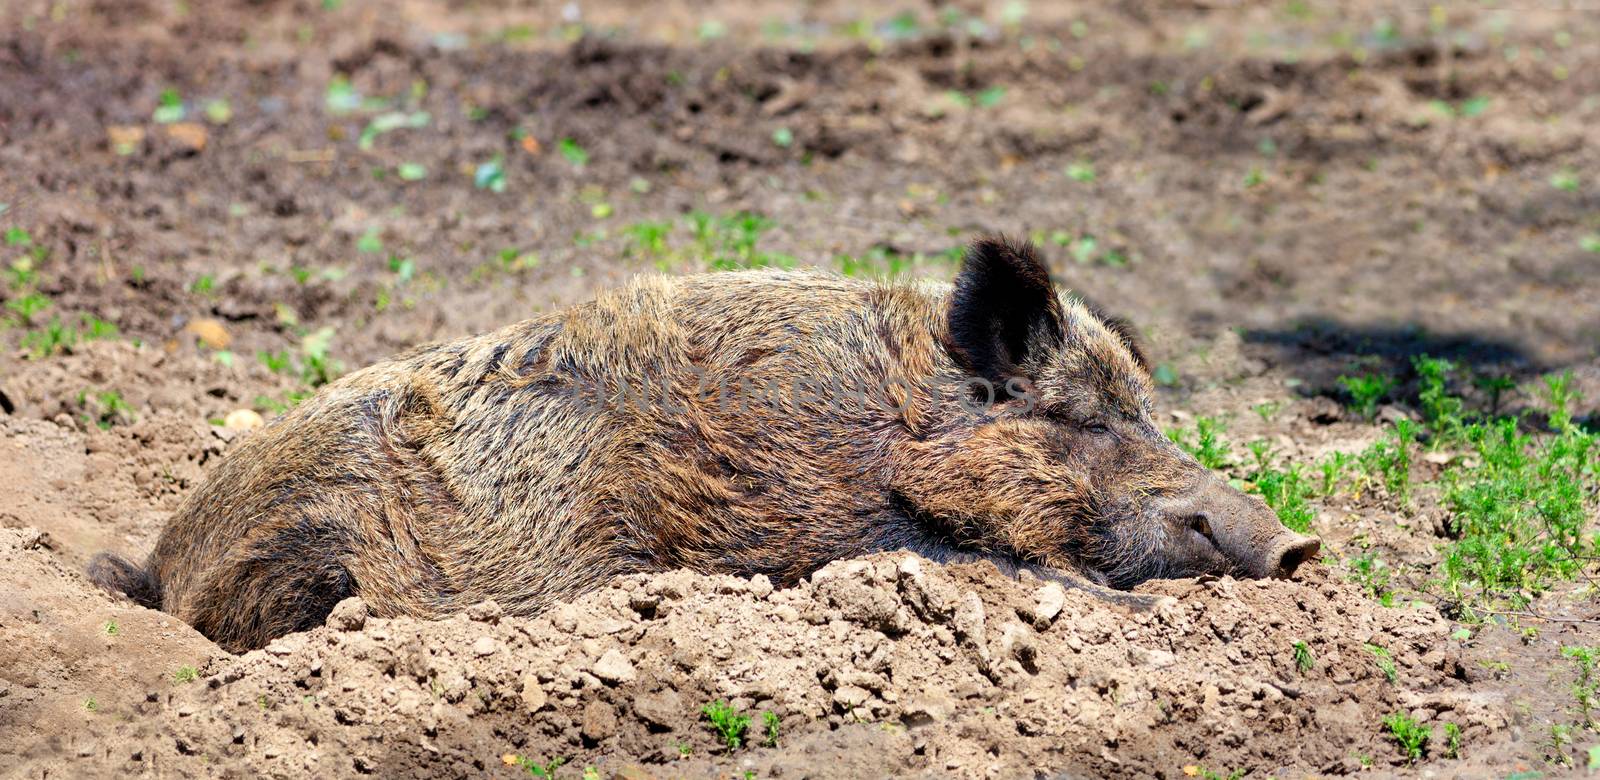 Wild boar sleeps peacefully buried in mud in the embrace of the sun's rays. by Sergii